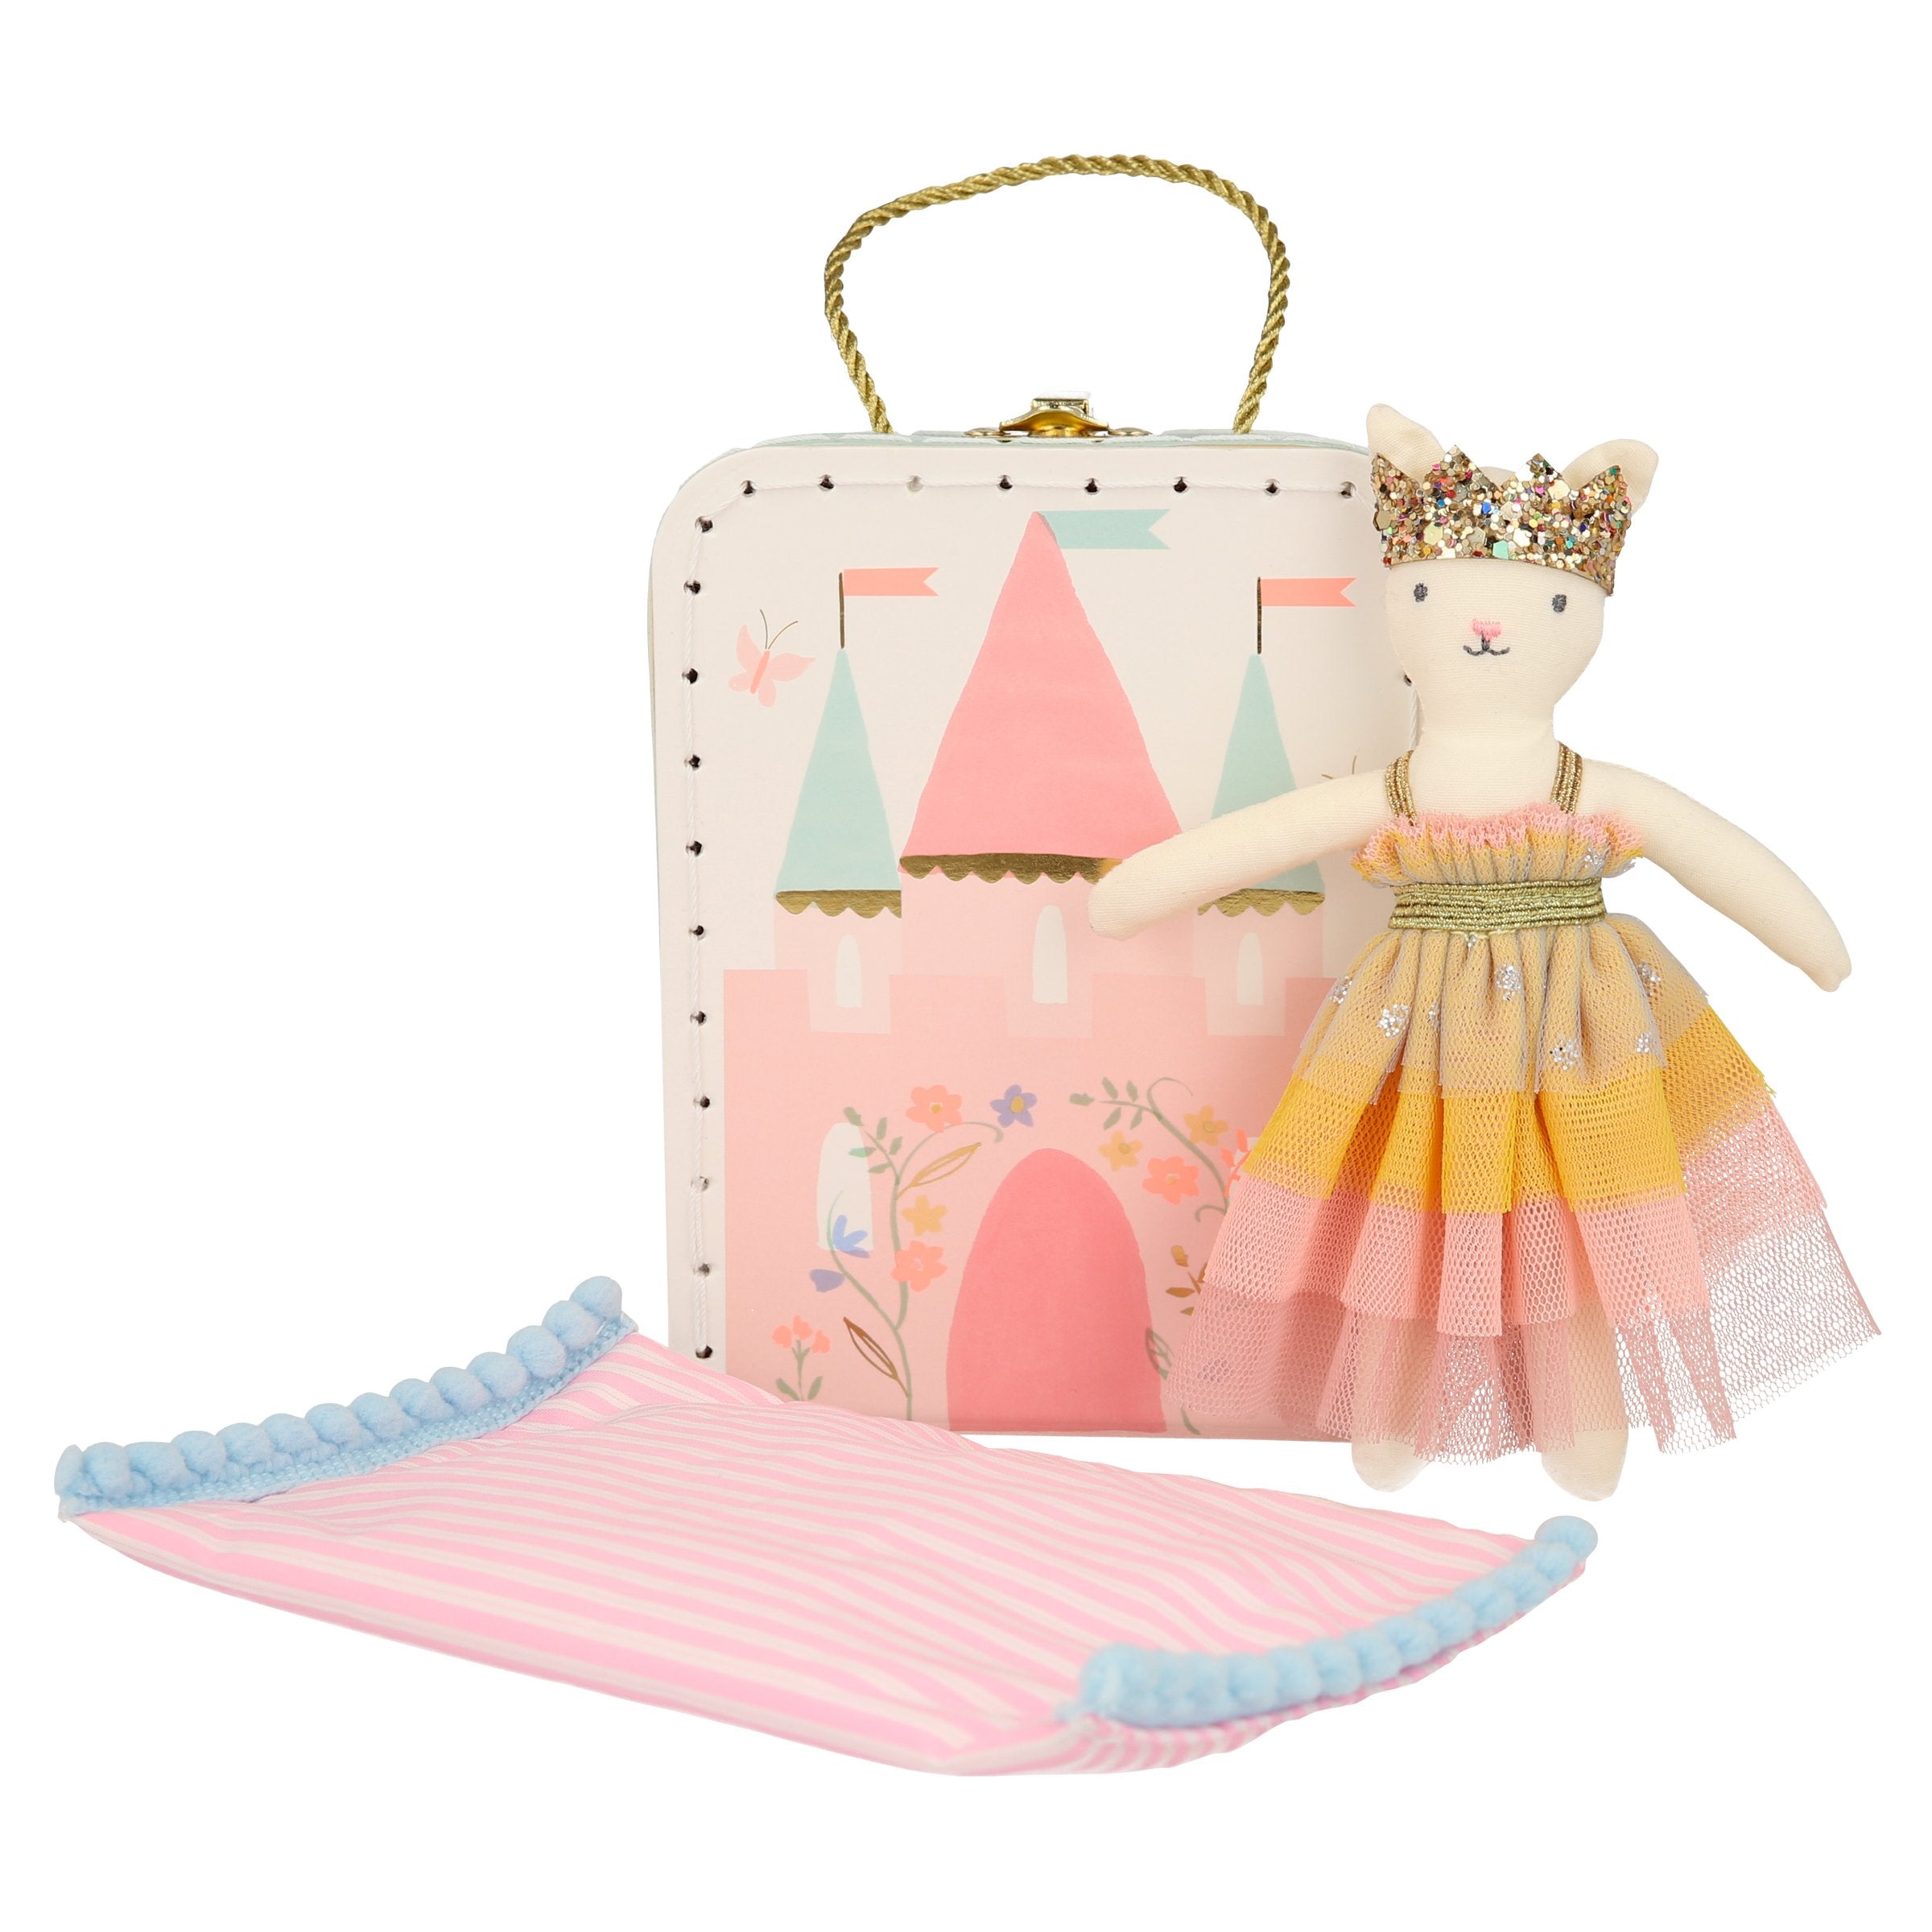 This mini suitcase, with a magical castle illustration, contains a charming cat toy for kids to play with inside.